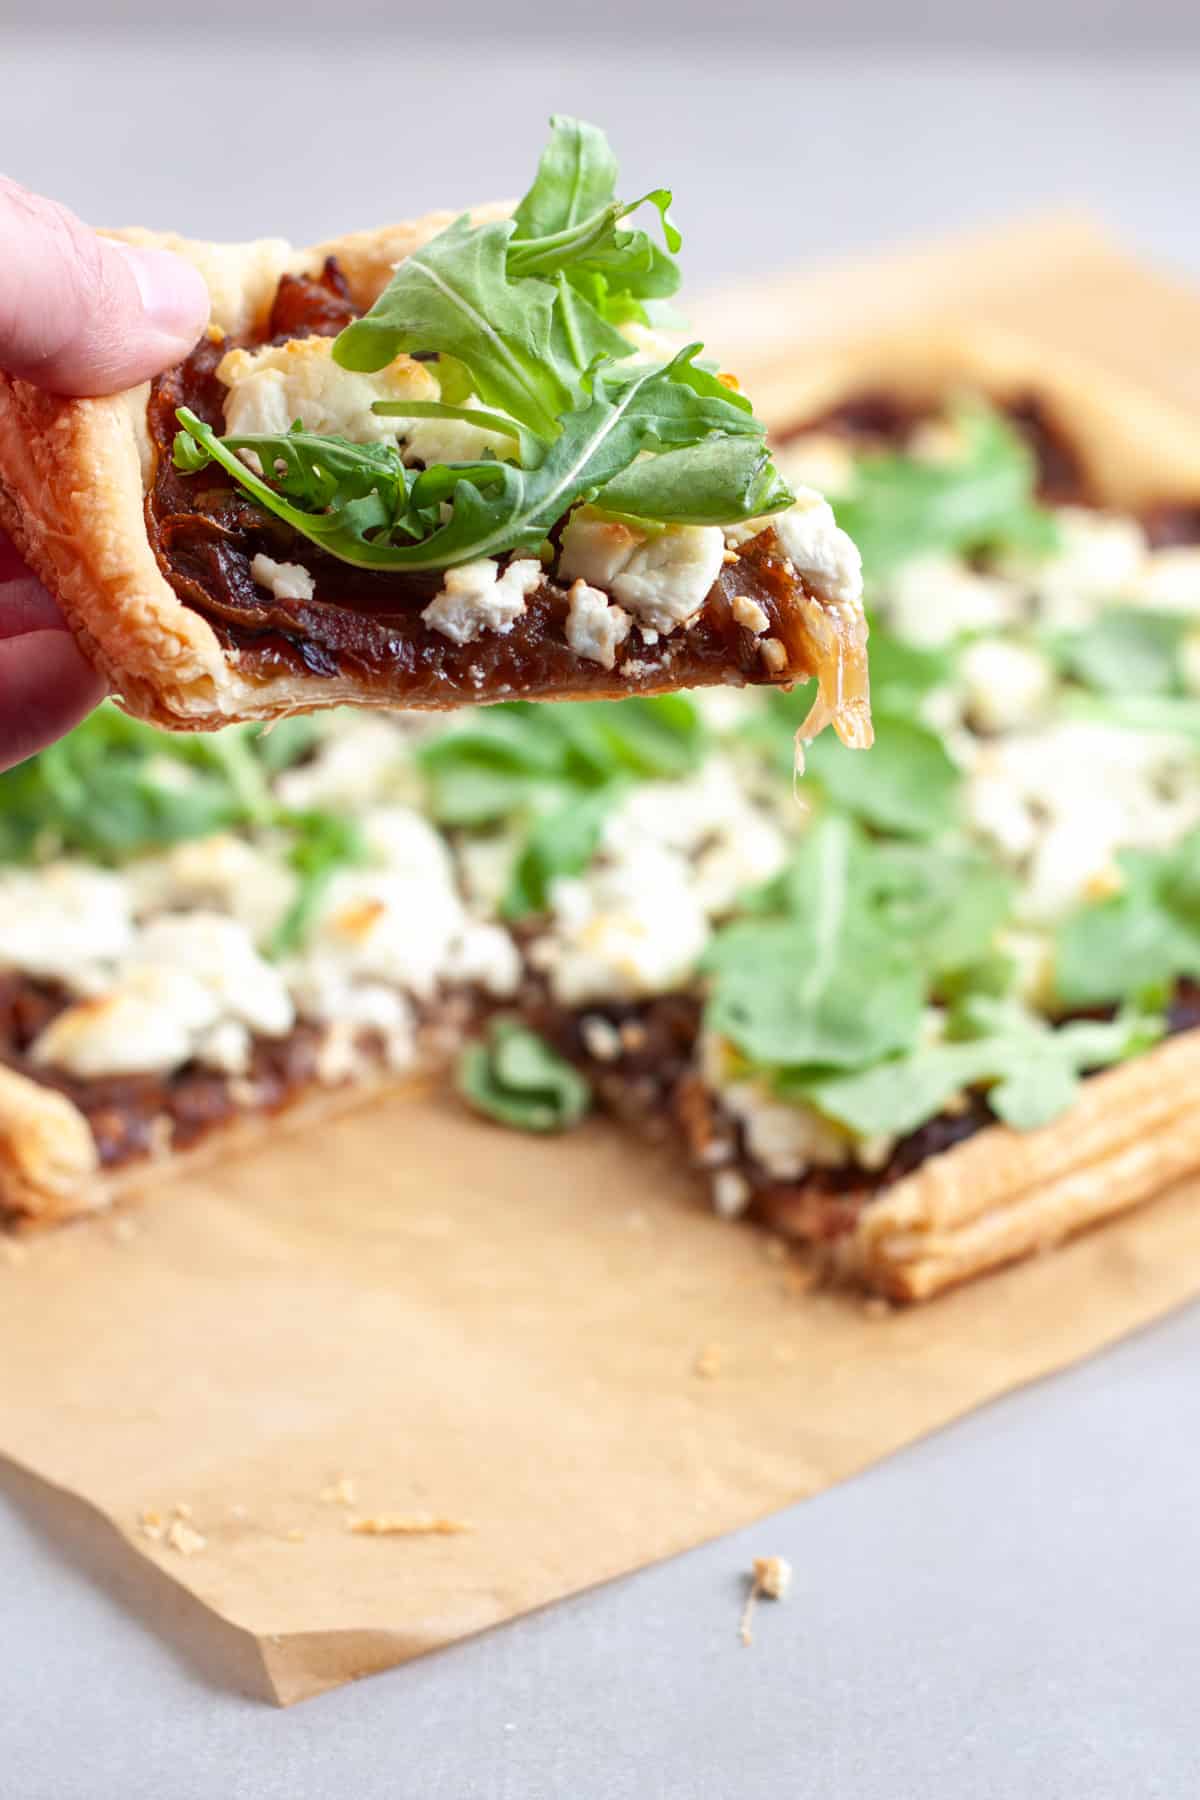 A portion of caramelized onion and goat cheese tart held by hand over the full tart.